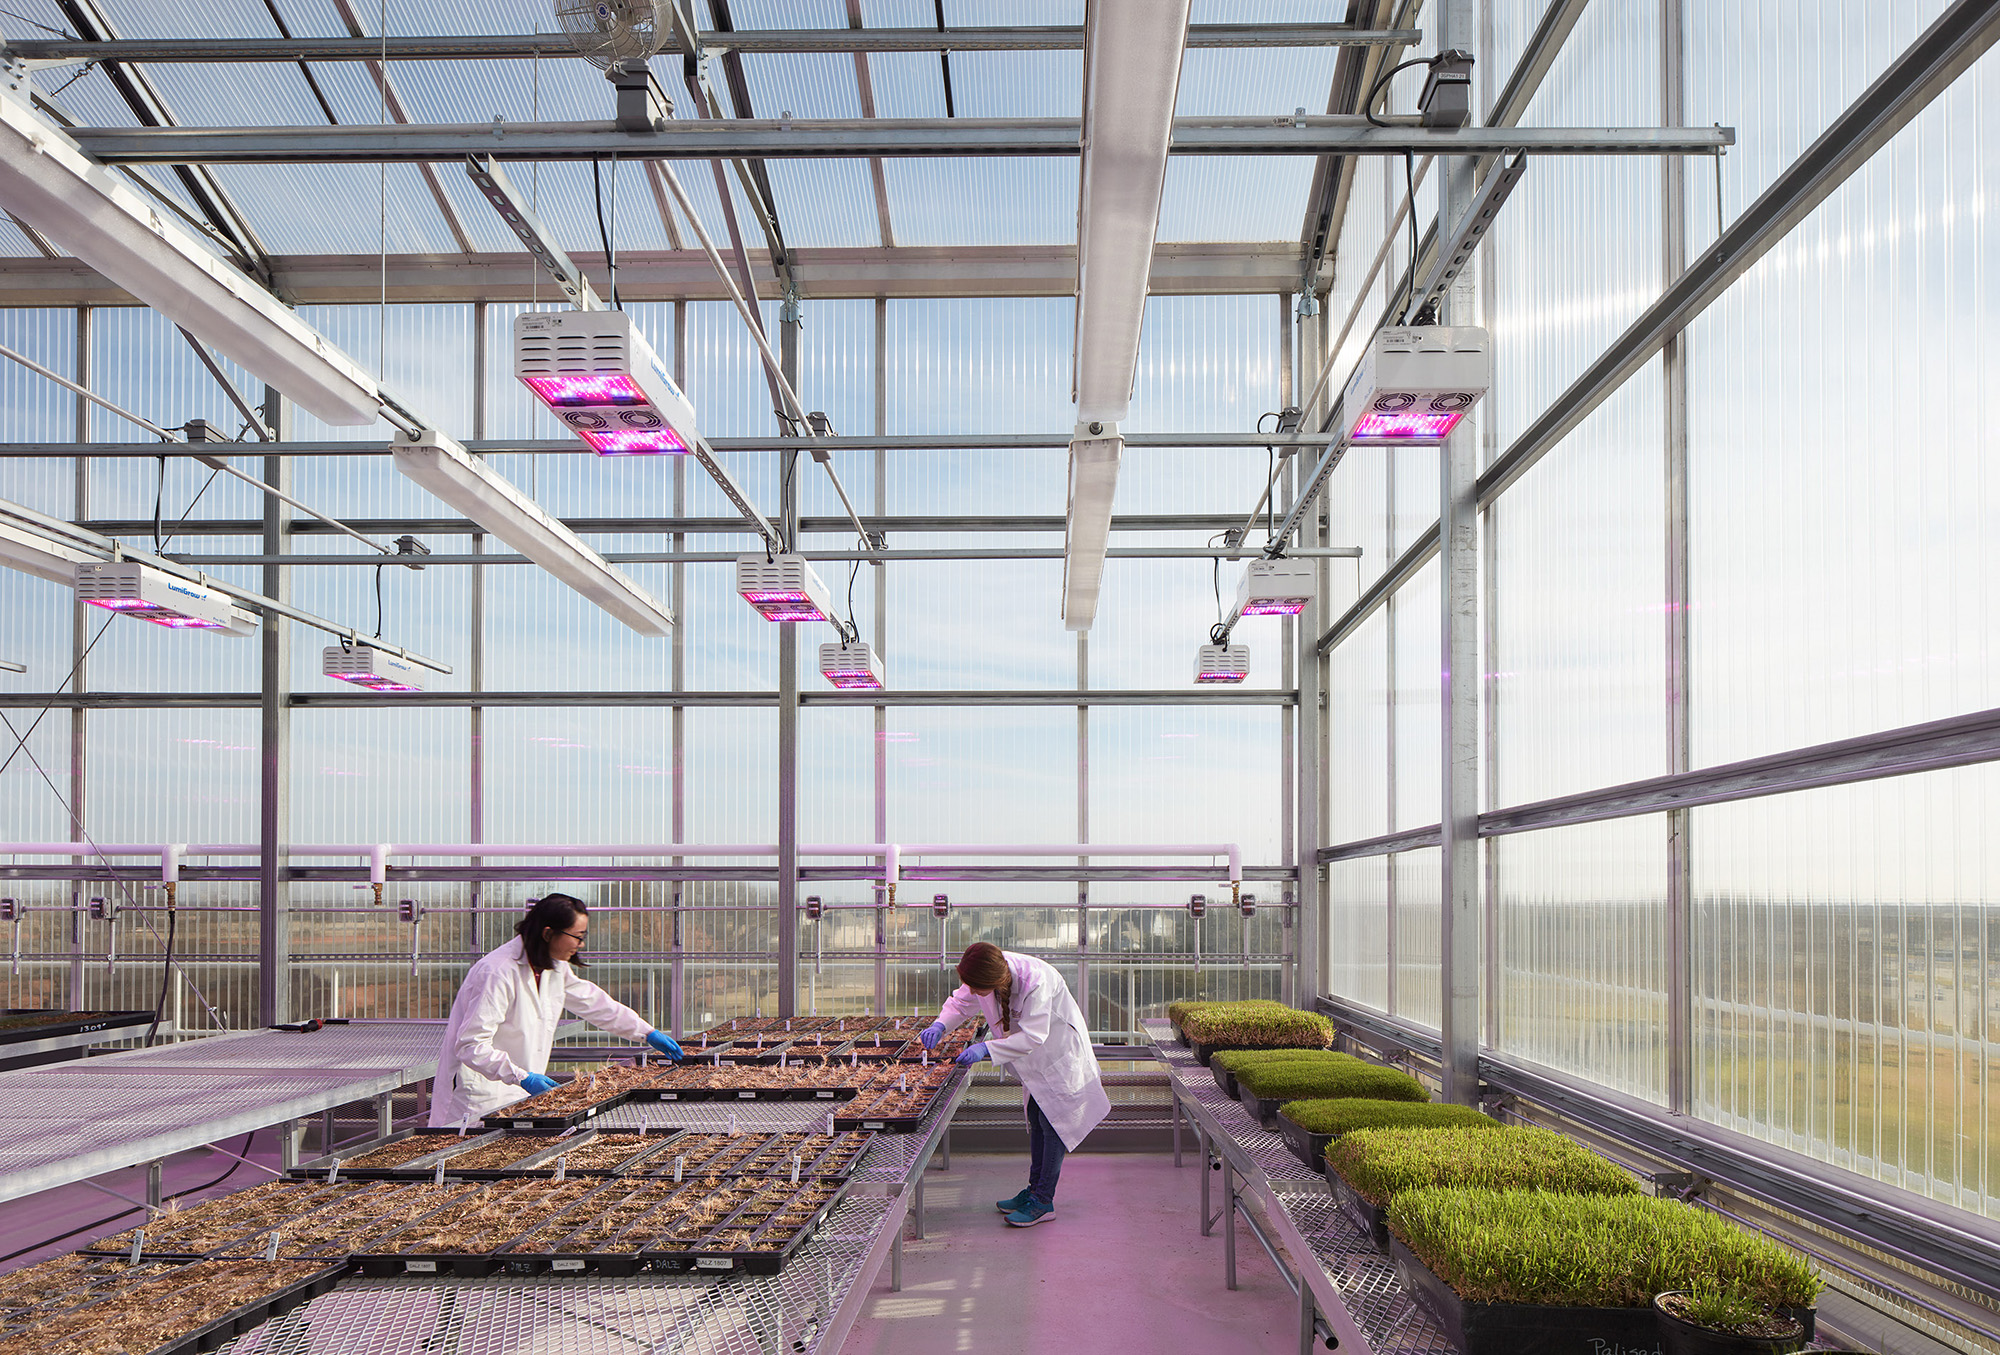 Researchers in rooftop greenhouse